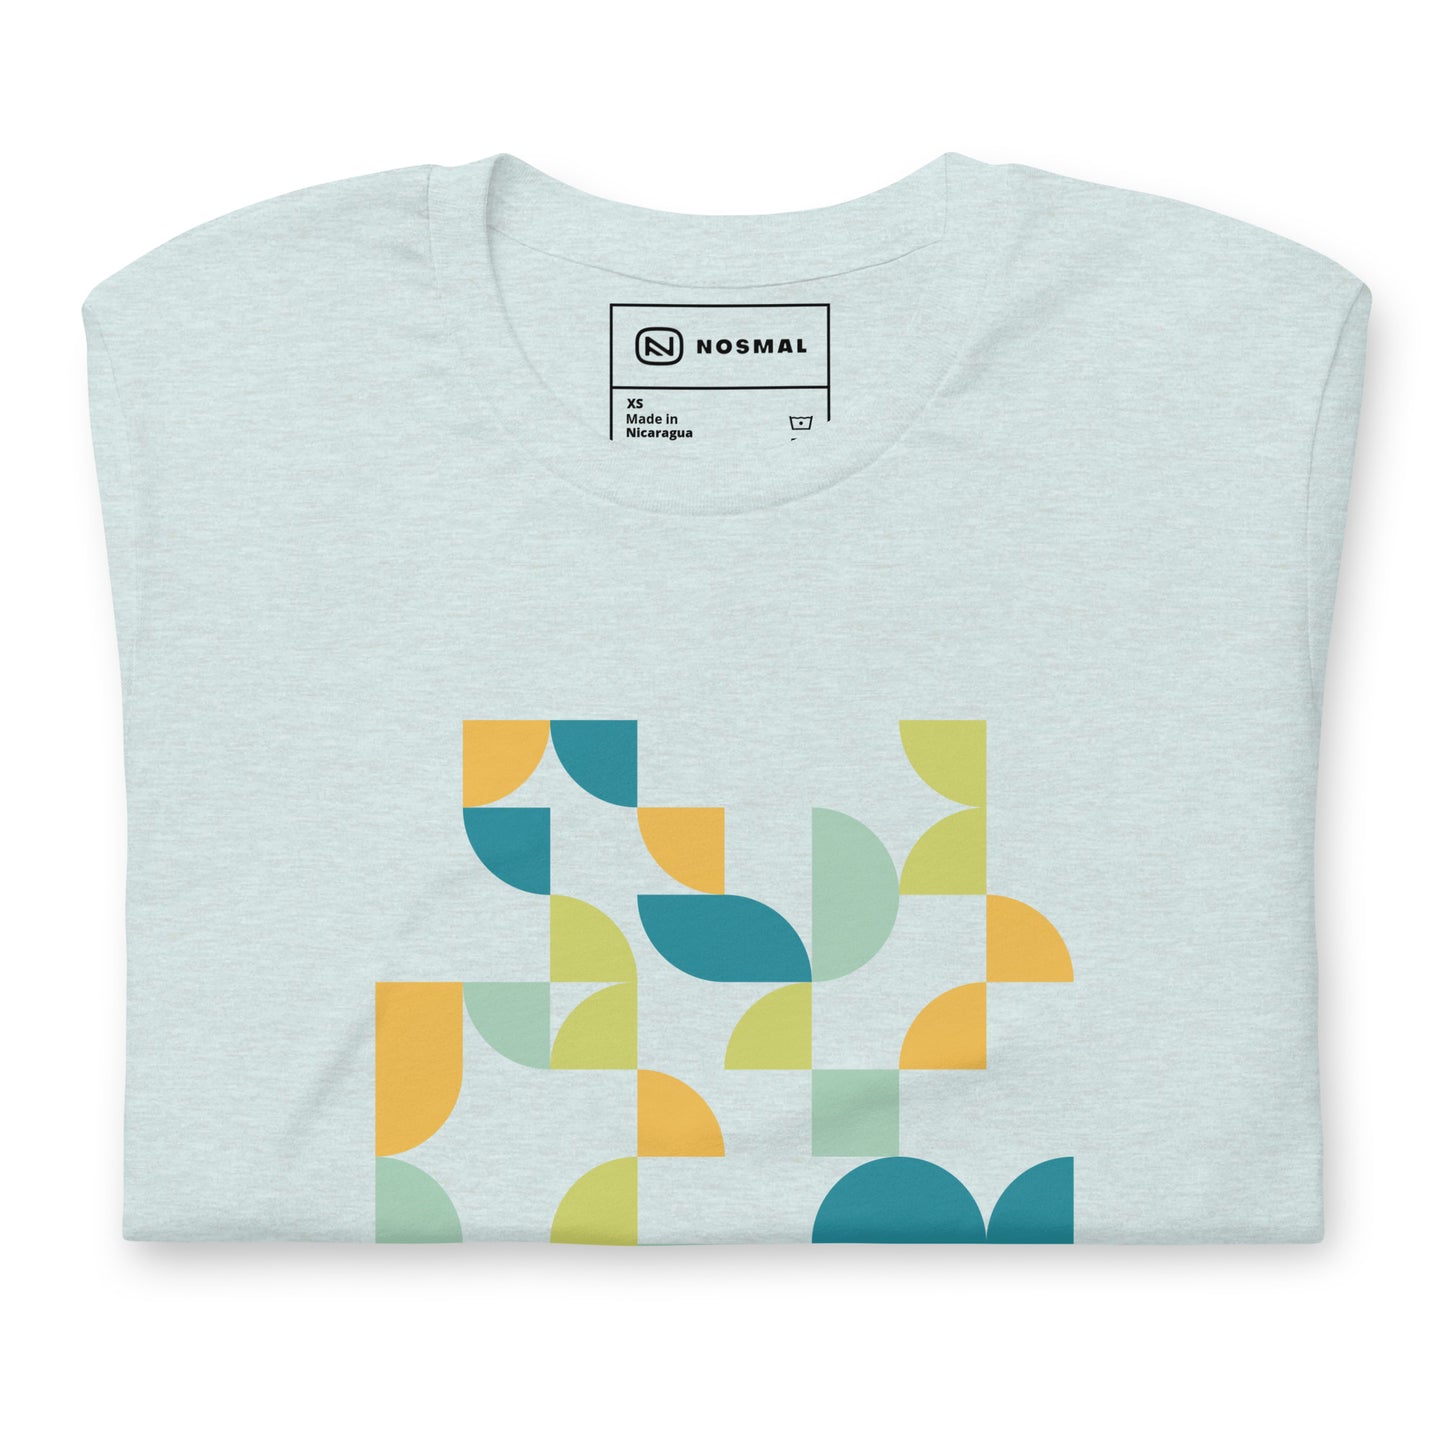 Top down view of geometria I midday design on heather prism ice blue unisex t-shirt.